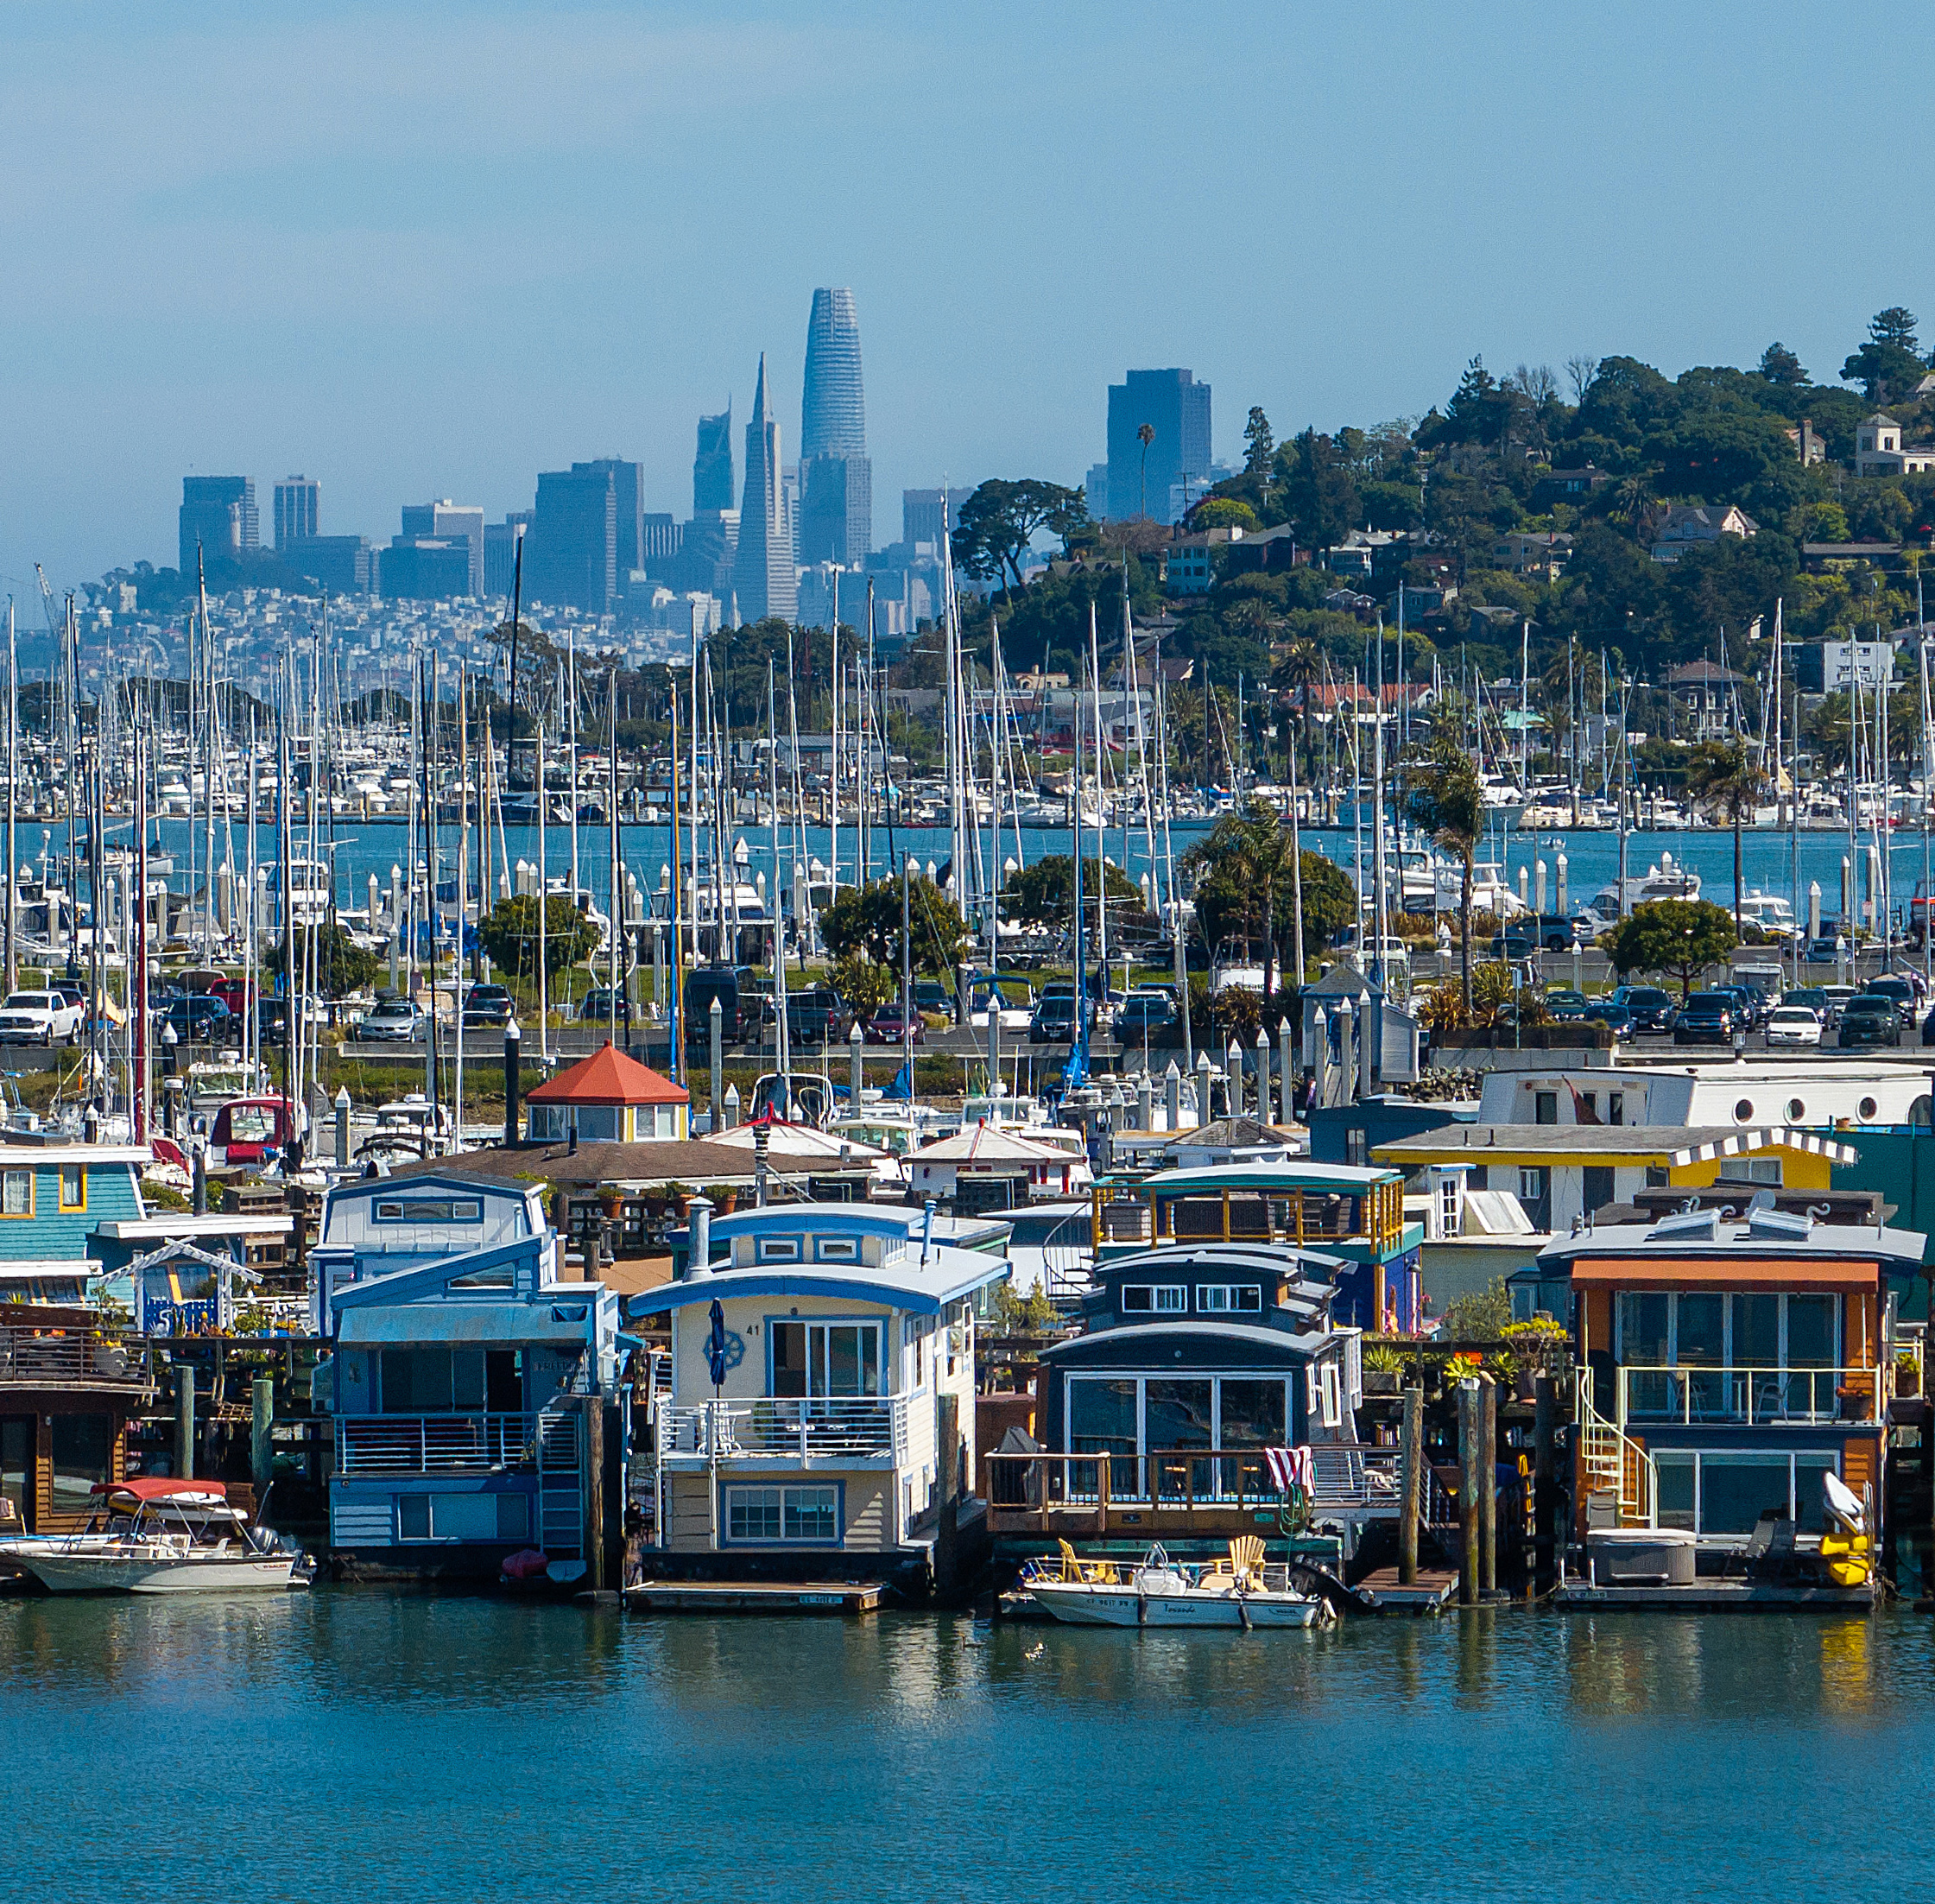 A marina with houseboats in the foreground and a city skyline in the background under a clear blue sky.